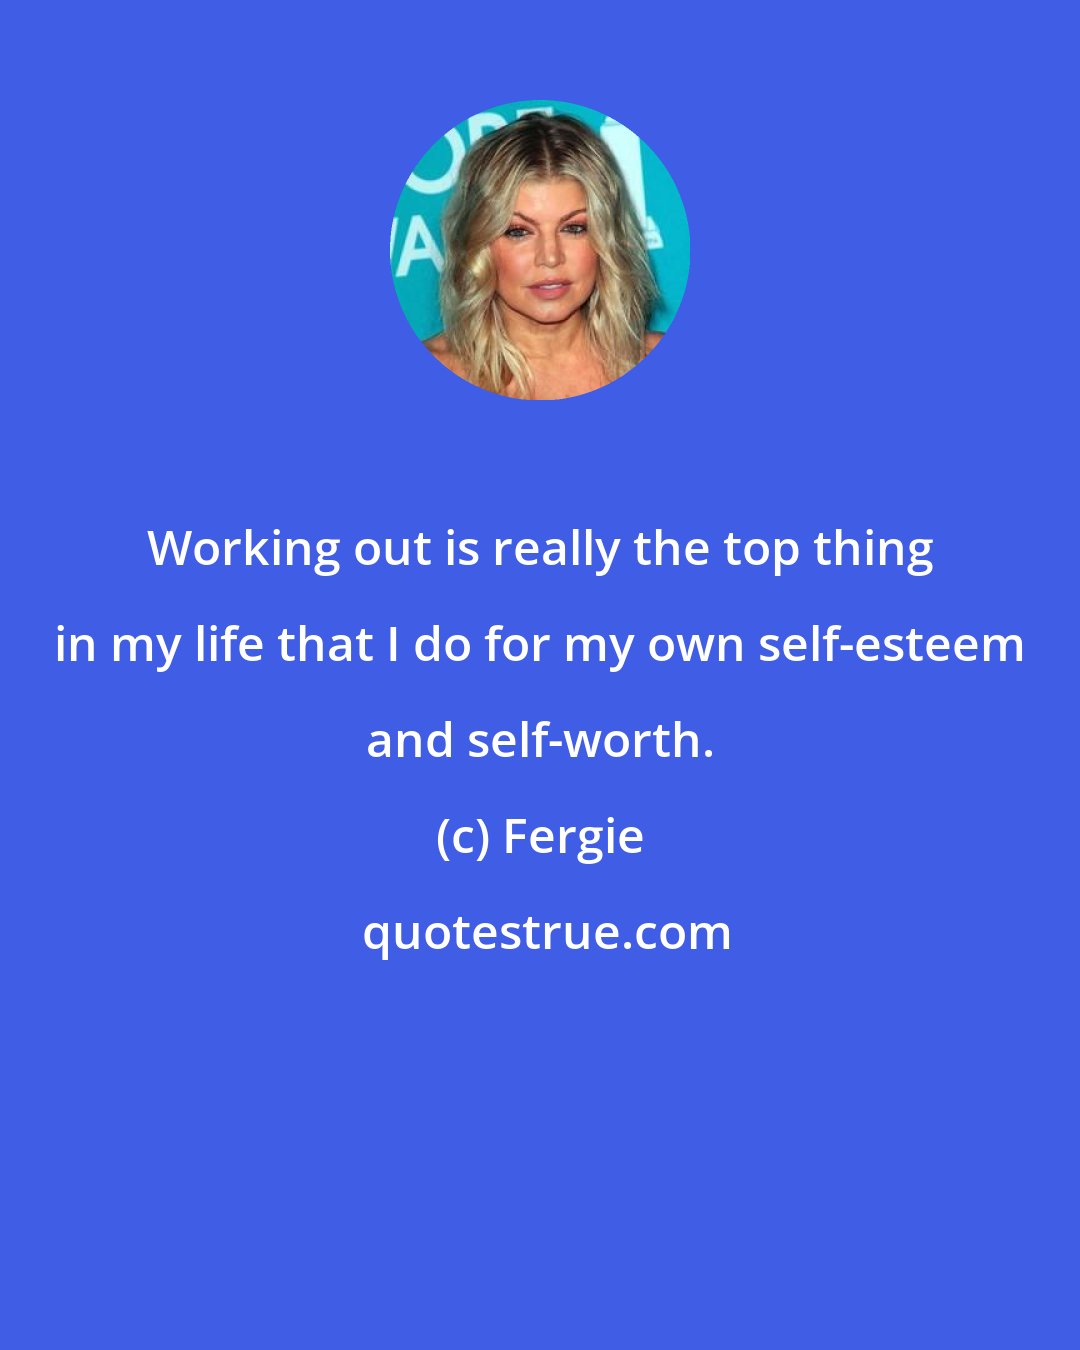 Fergie: Working out is really the top thing in my life that I do for my own self-esteem and self-worth.